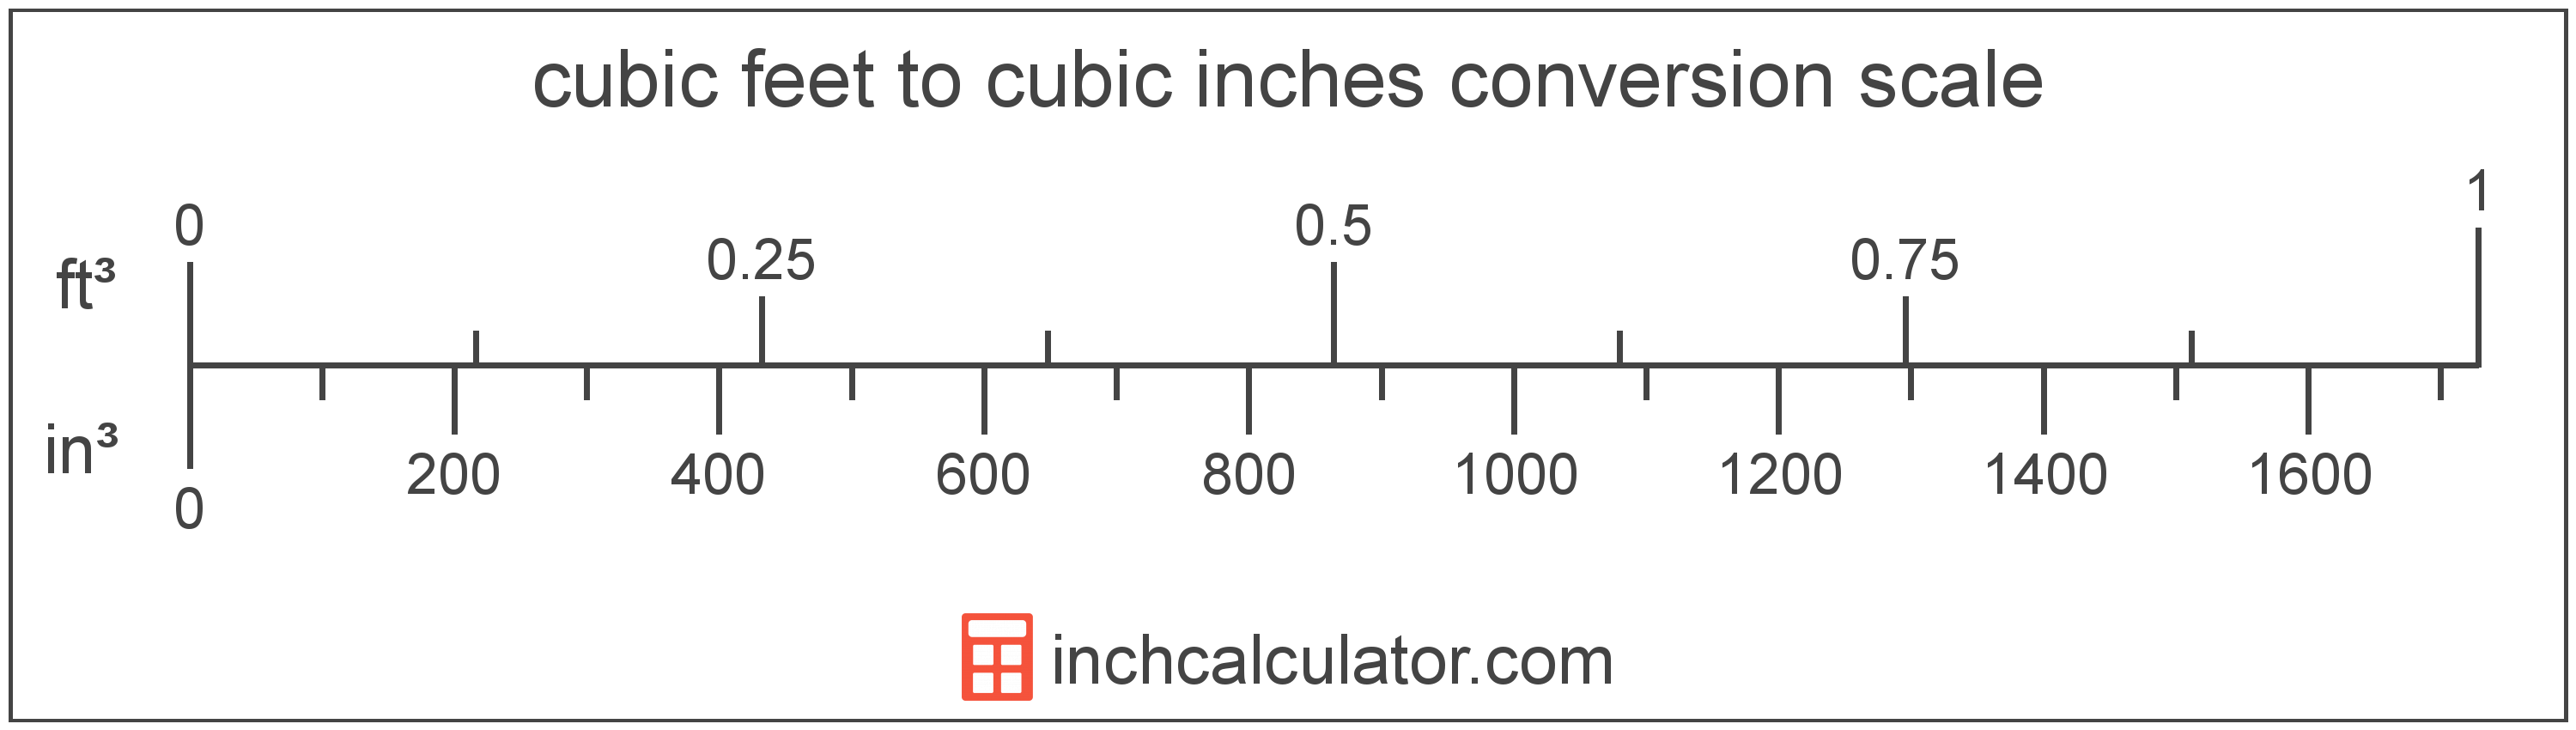 conversion scale showing cubic inches and equivalent cubic feet volume values